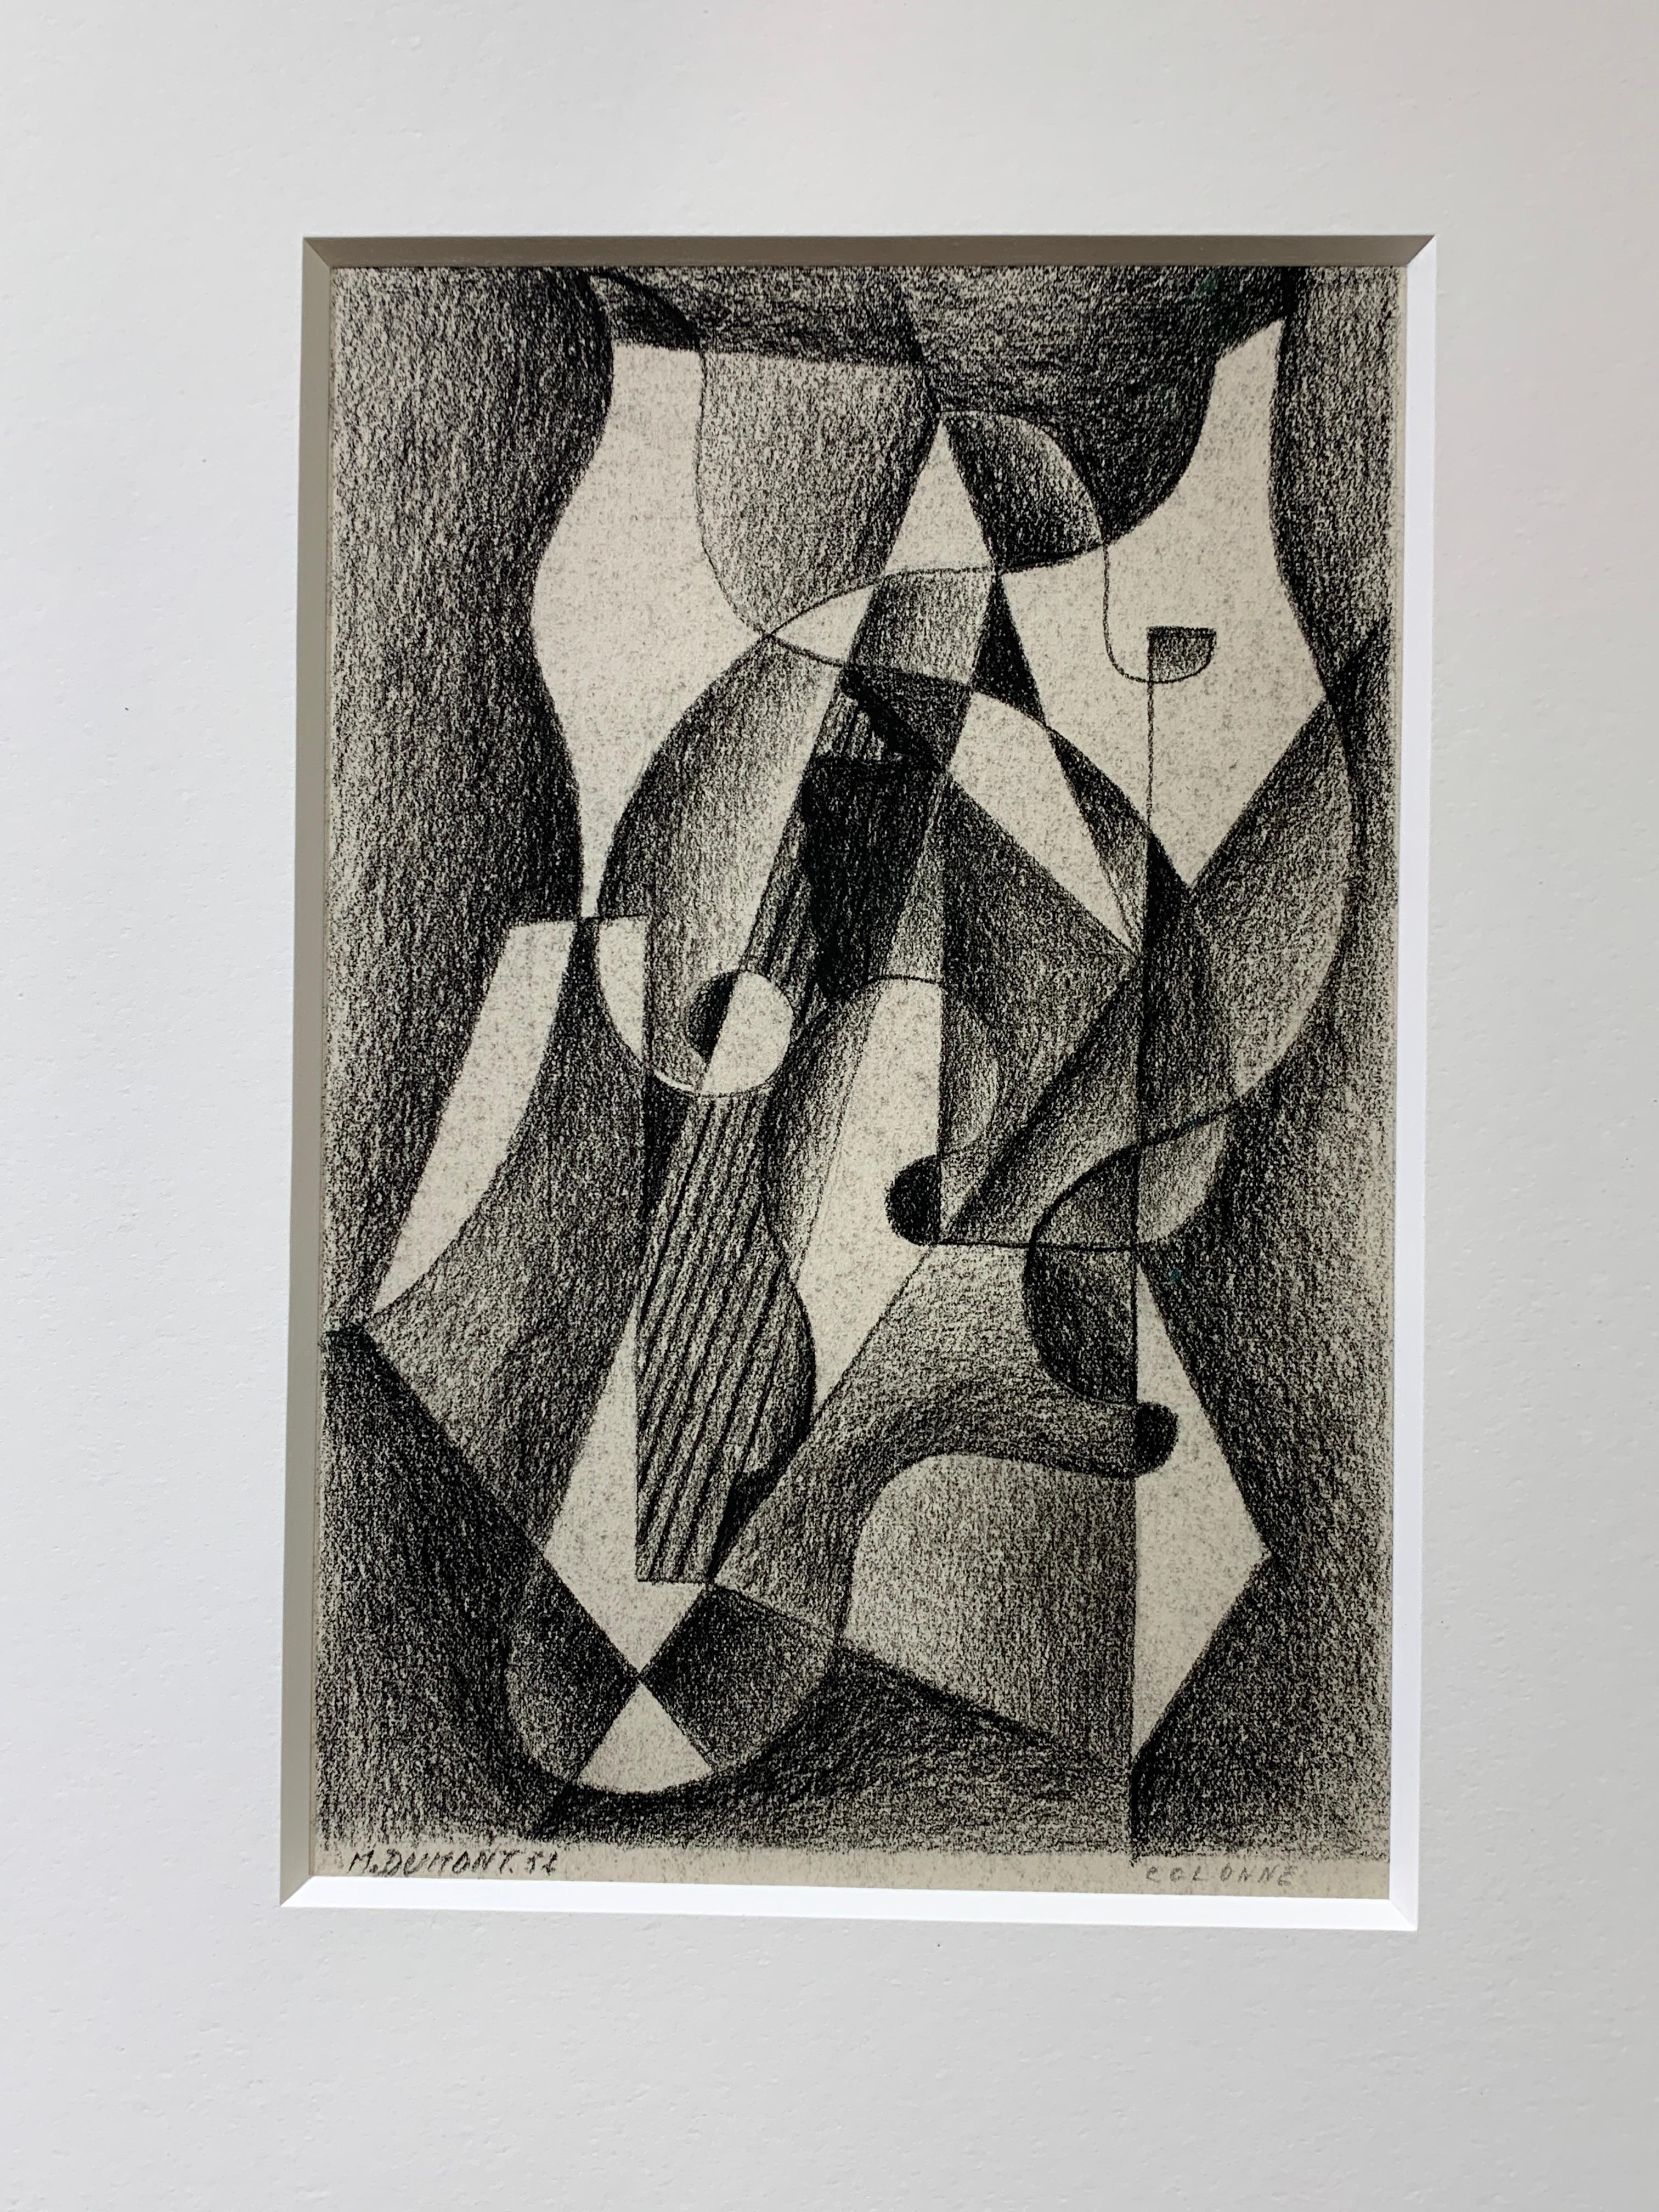 20th century Belgium, Black and White Abstract pencil drawing, Etude - Art by Marcel Dumont